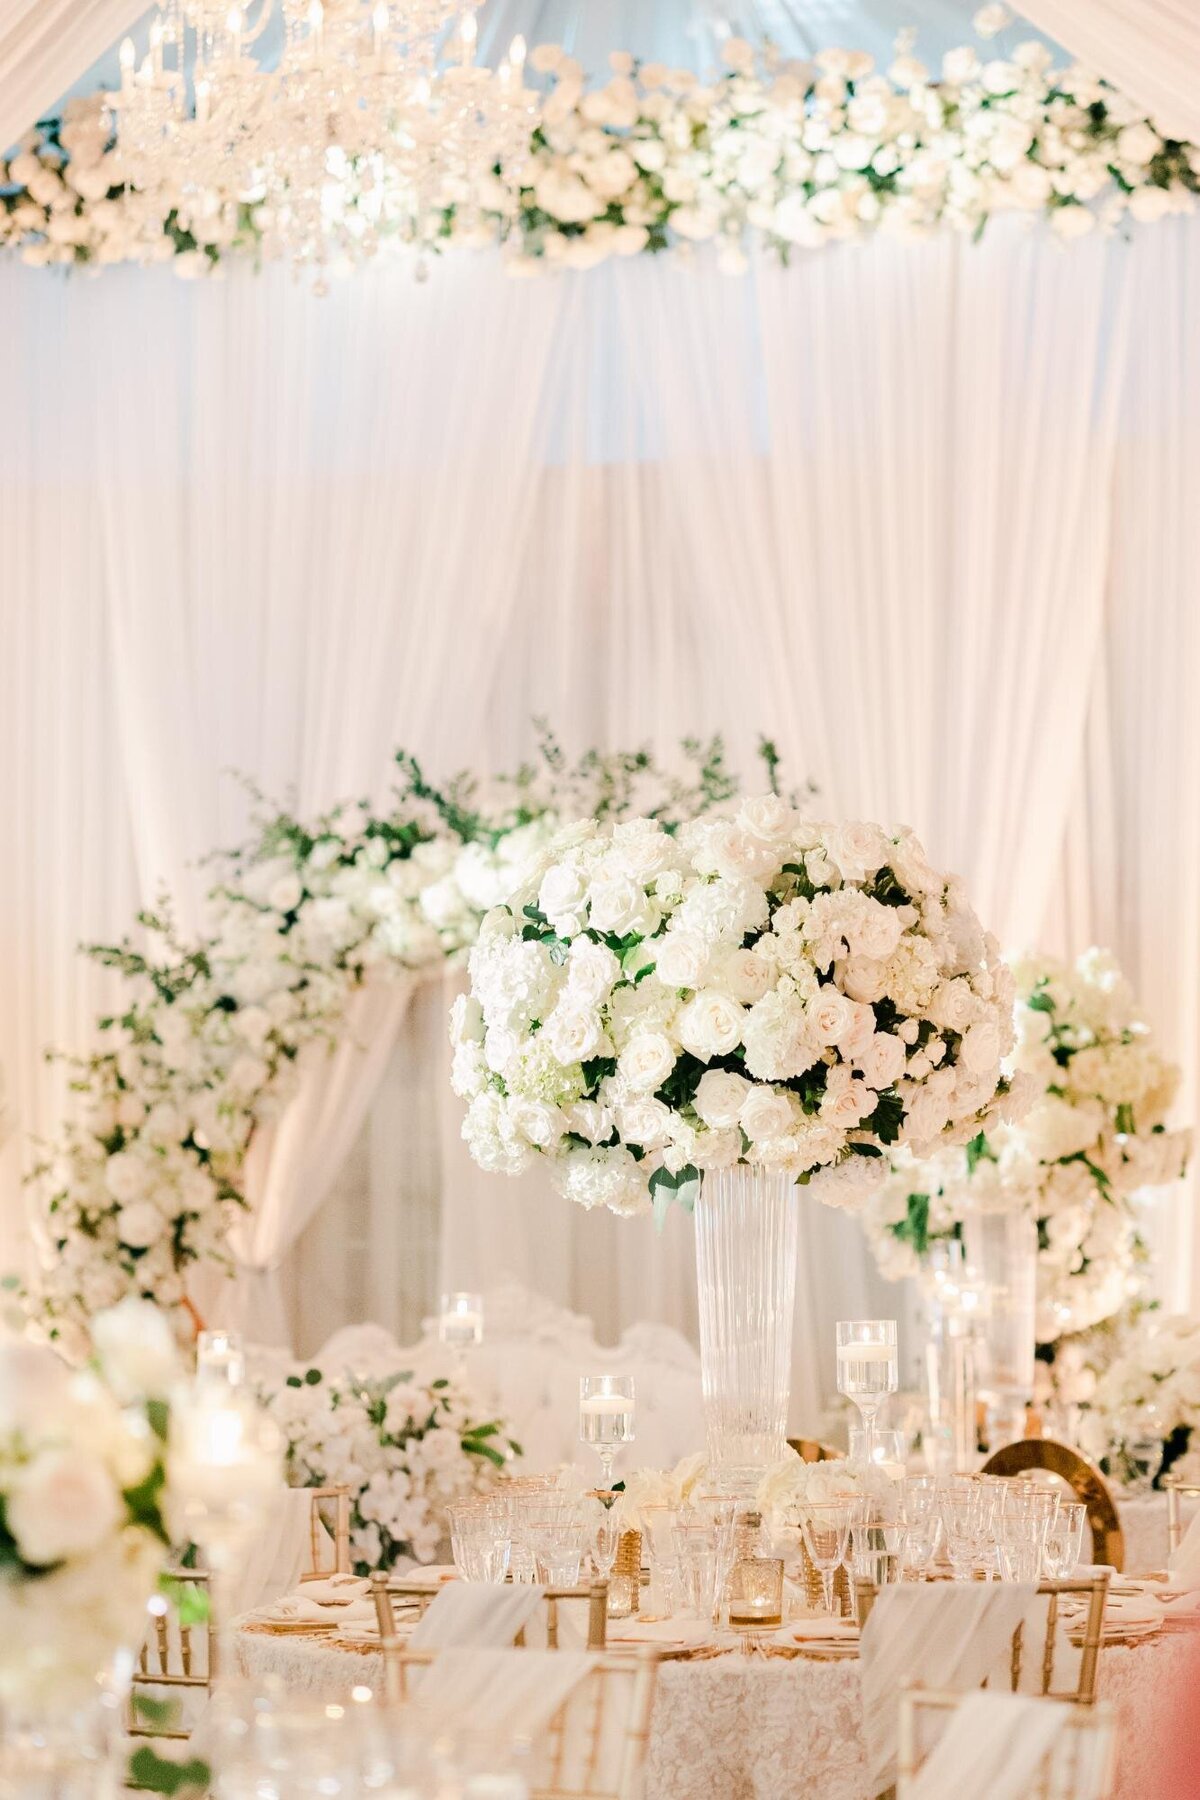 An elegant wedding reception setup with white floral centerpieces and draped fabric.